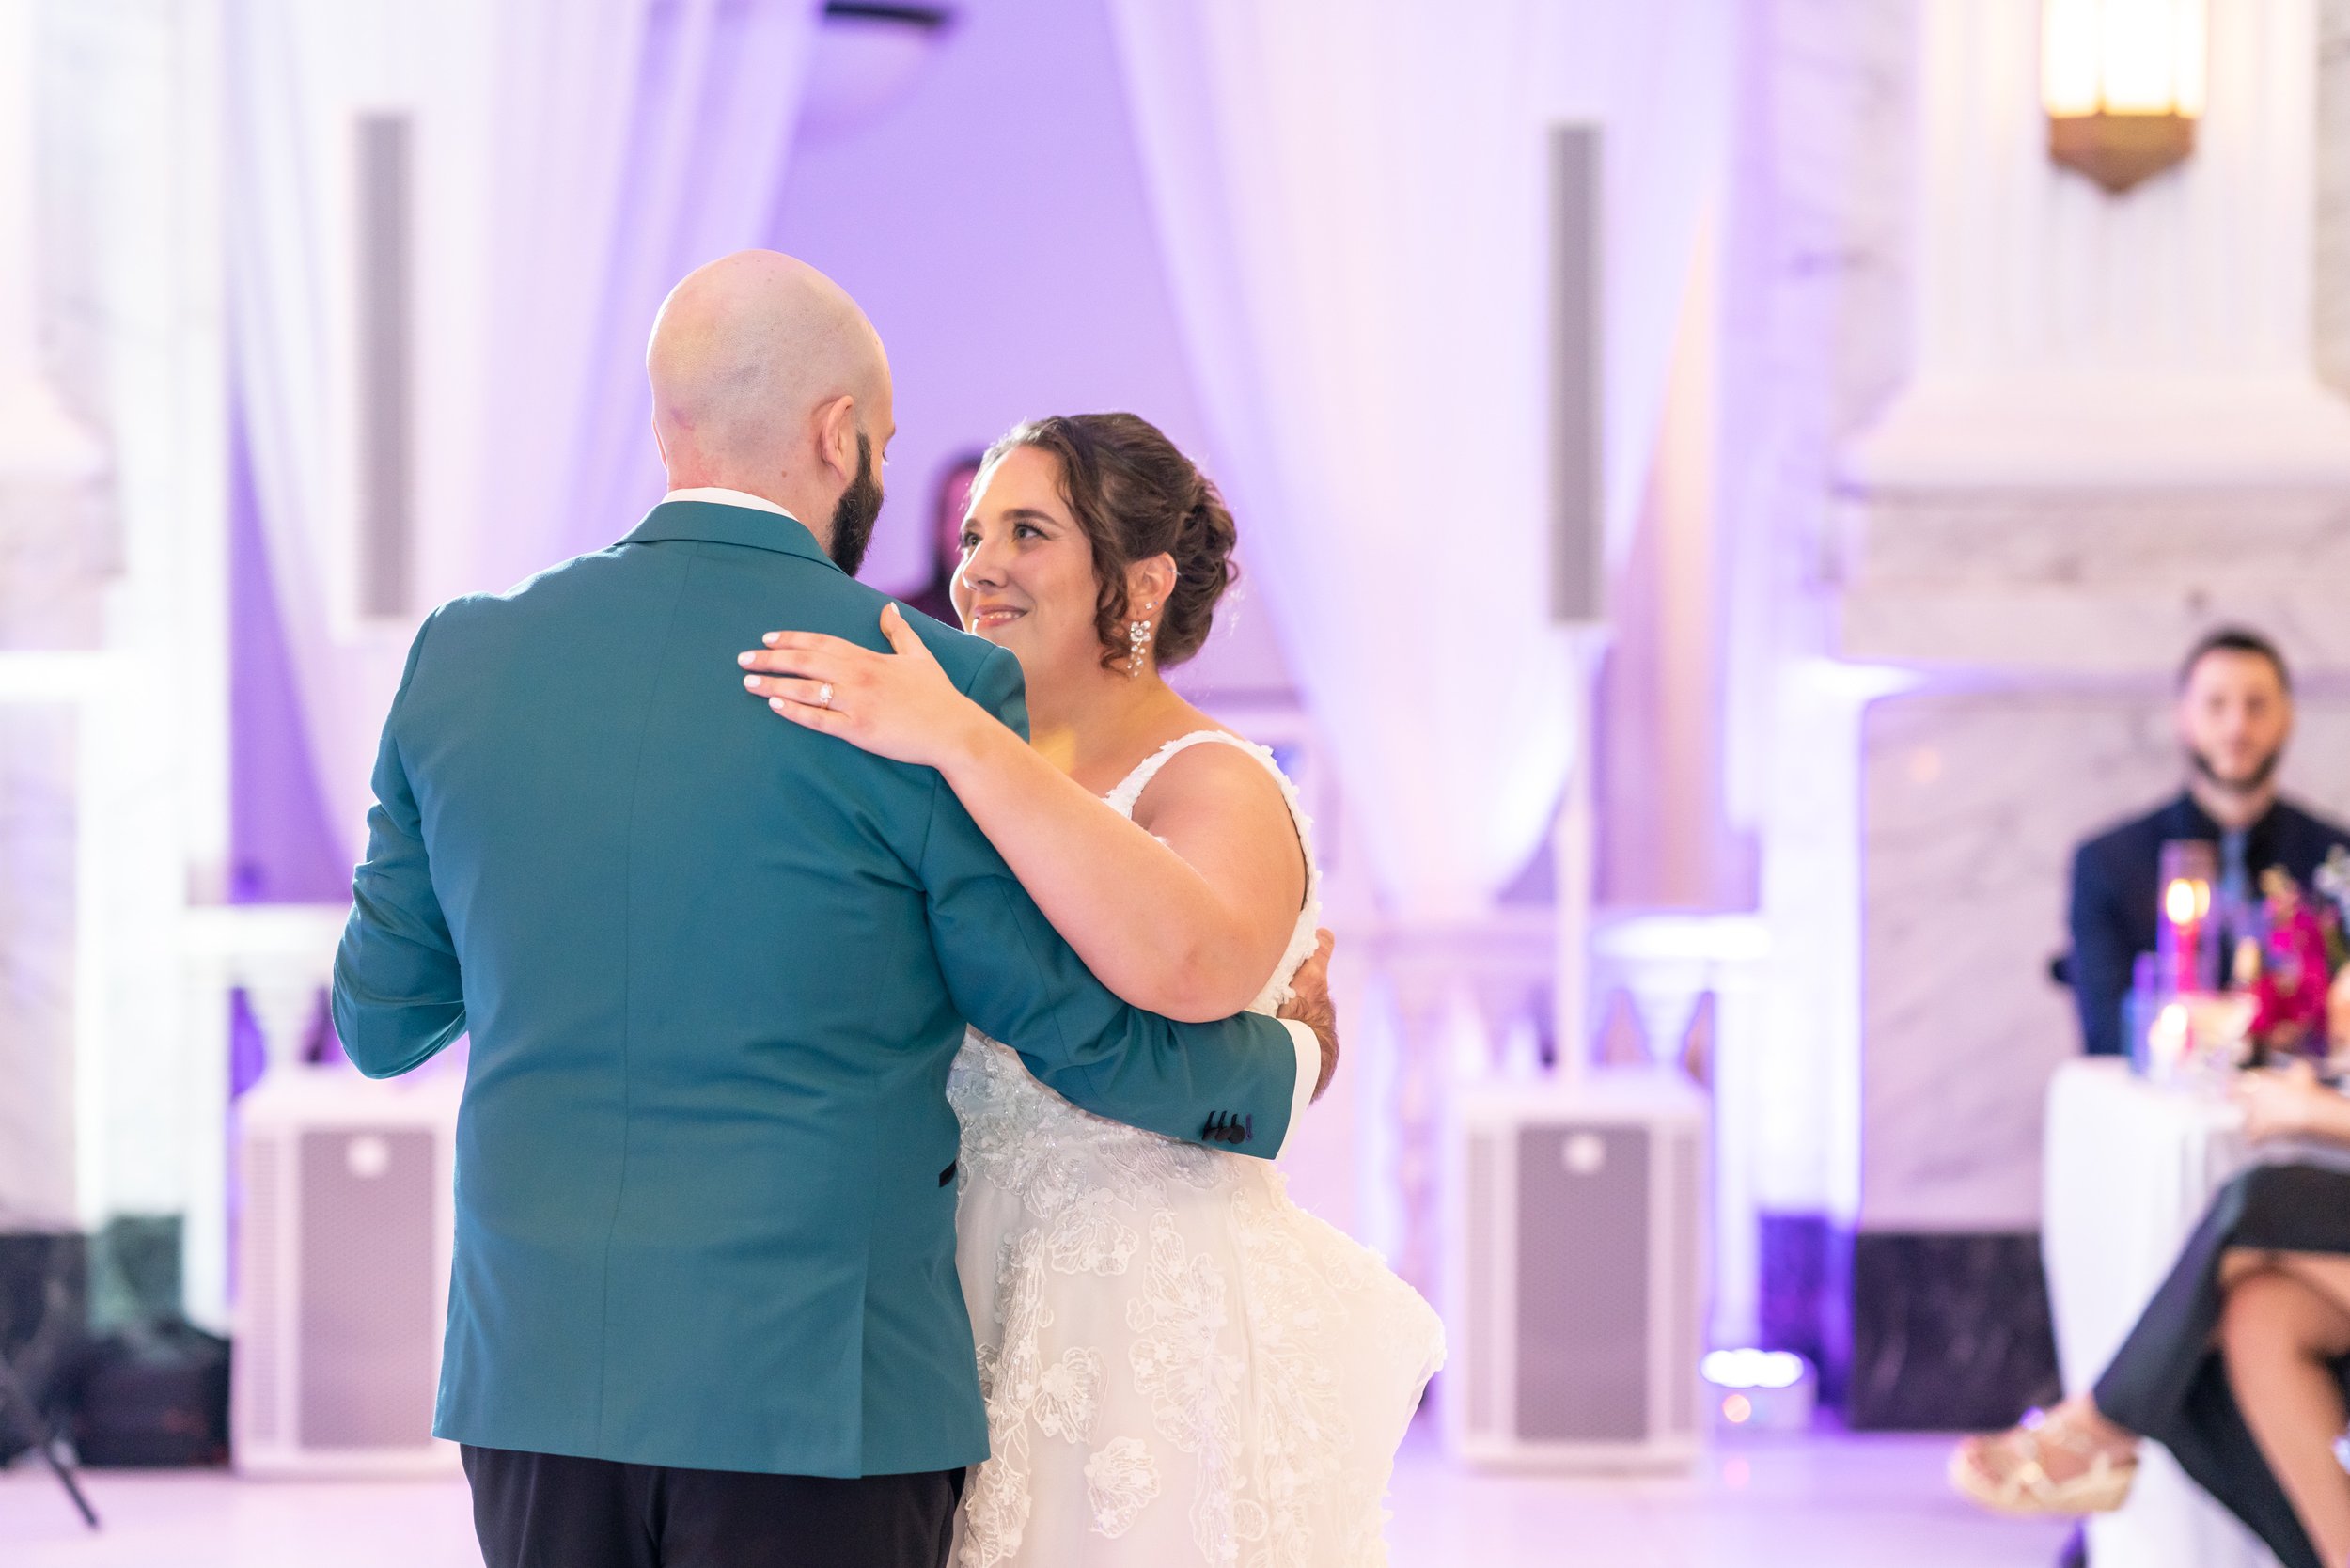 First dance at fun wedding at Citizen's Ballroom in Frederick Md